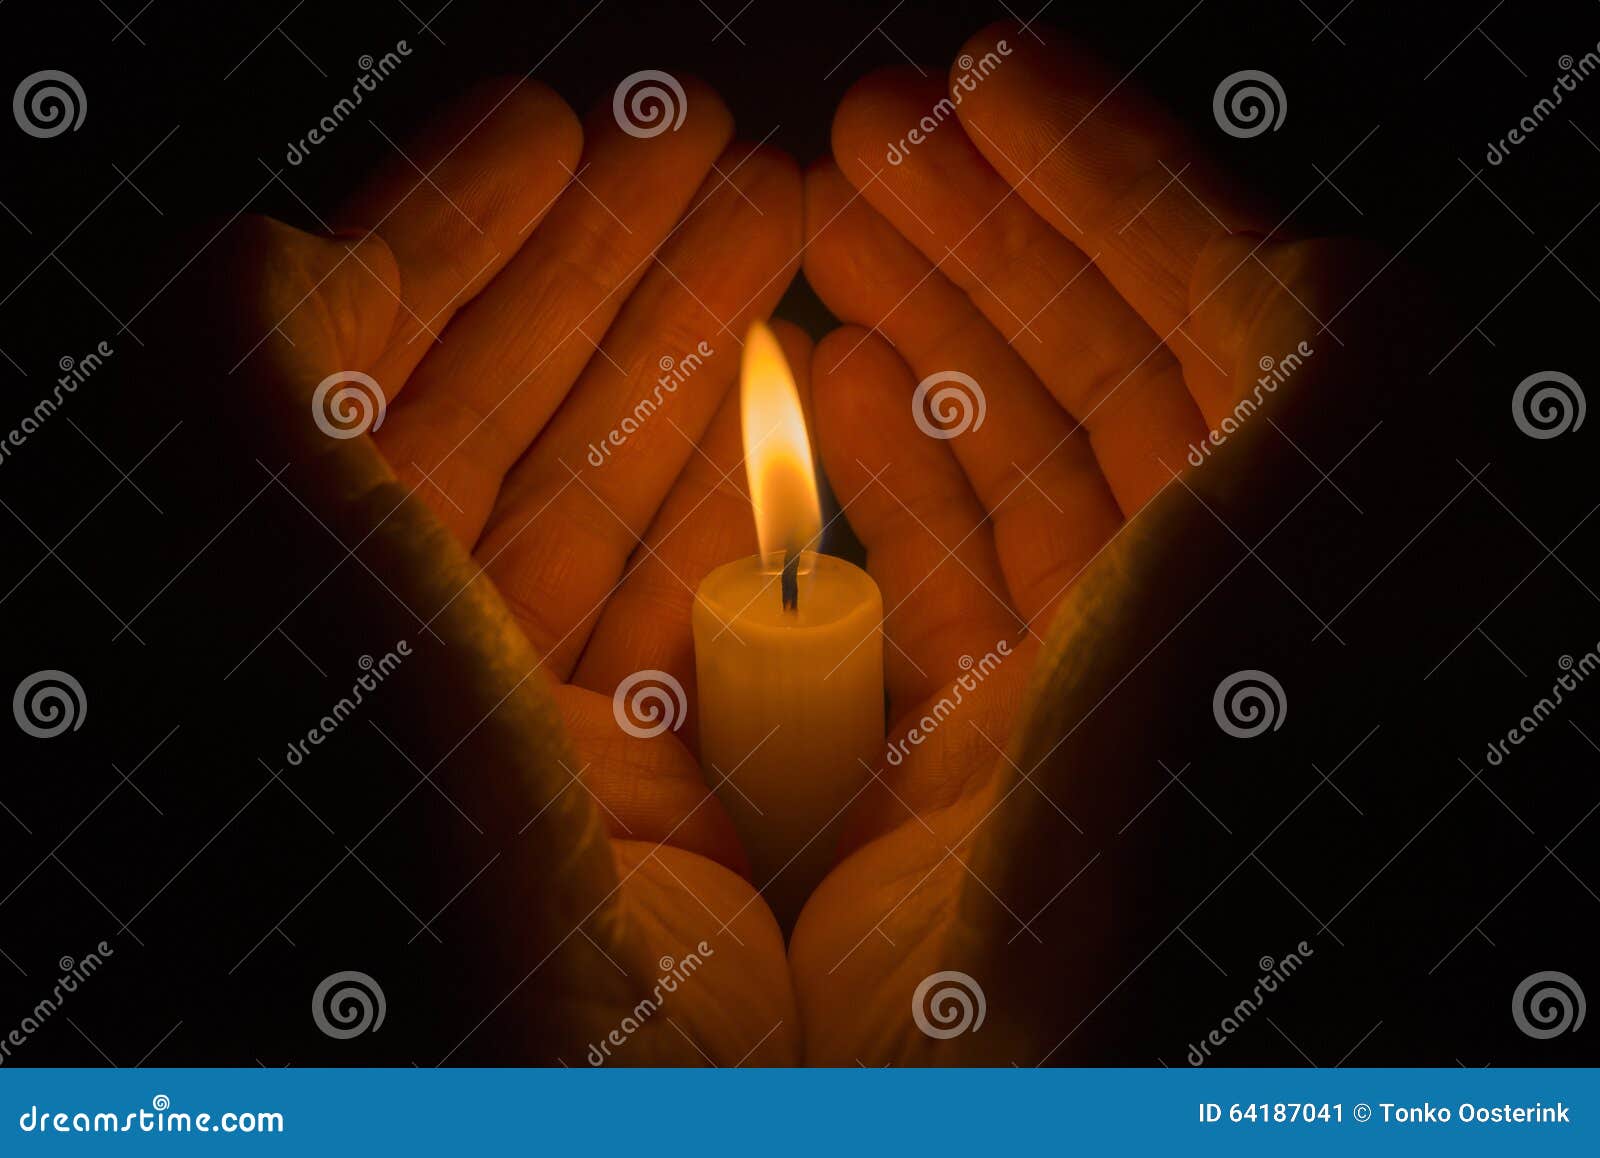 Best Emergency Candle Royalty-Free Images, Stock Photos & Pictures